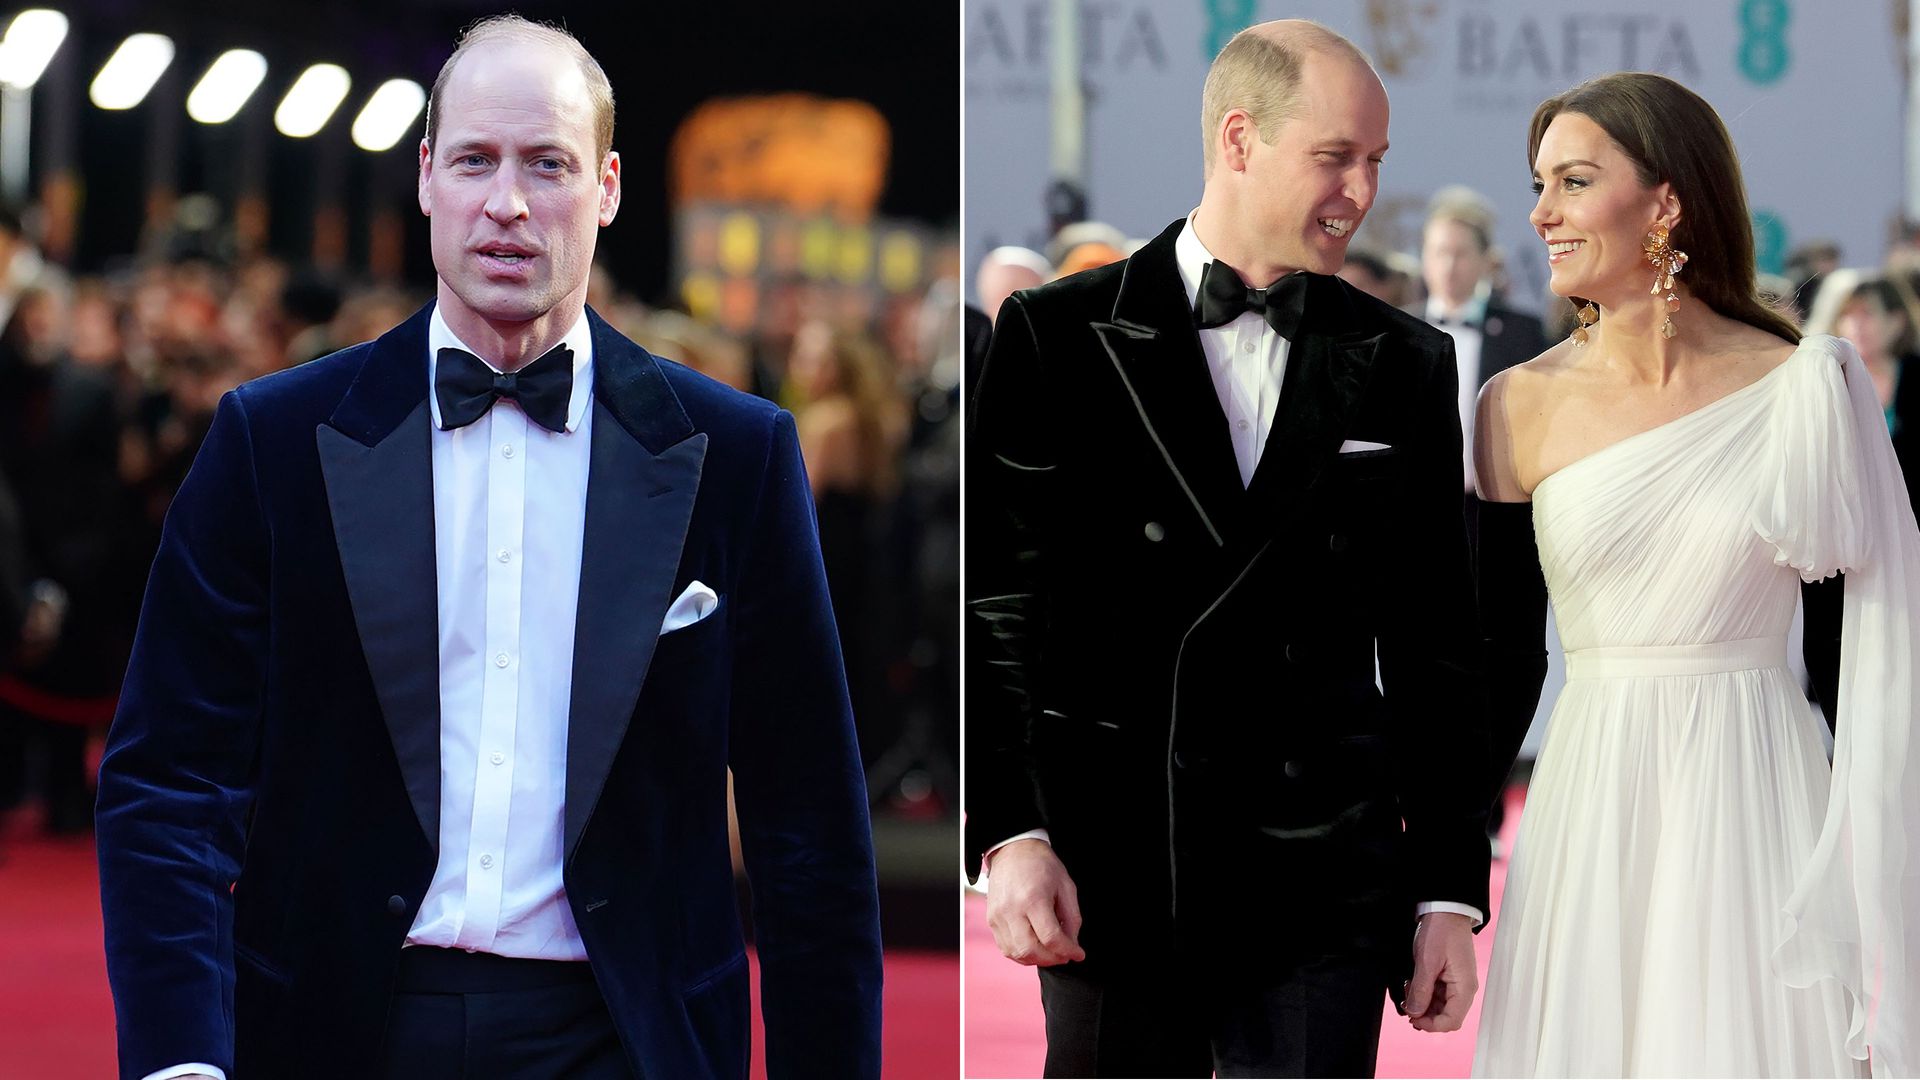 Prince William spoke about his wife Kate Middleton at the BAFTAS